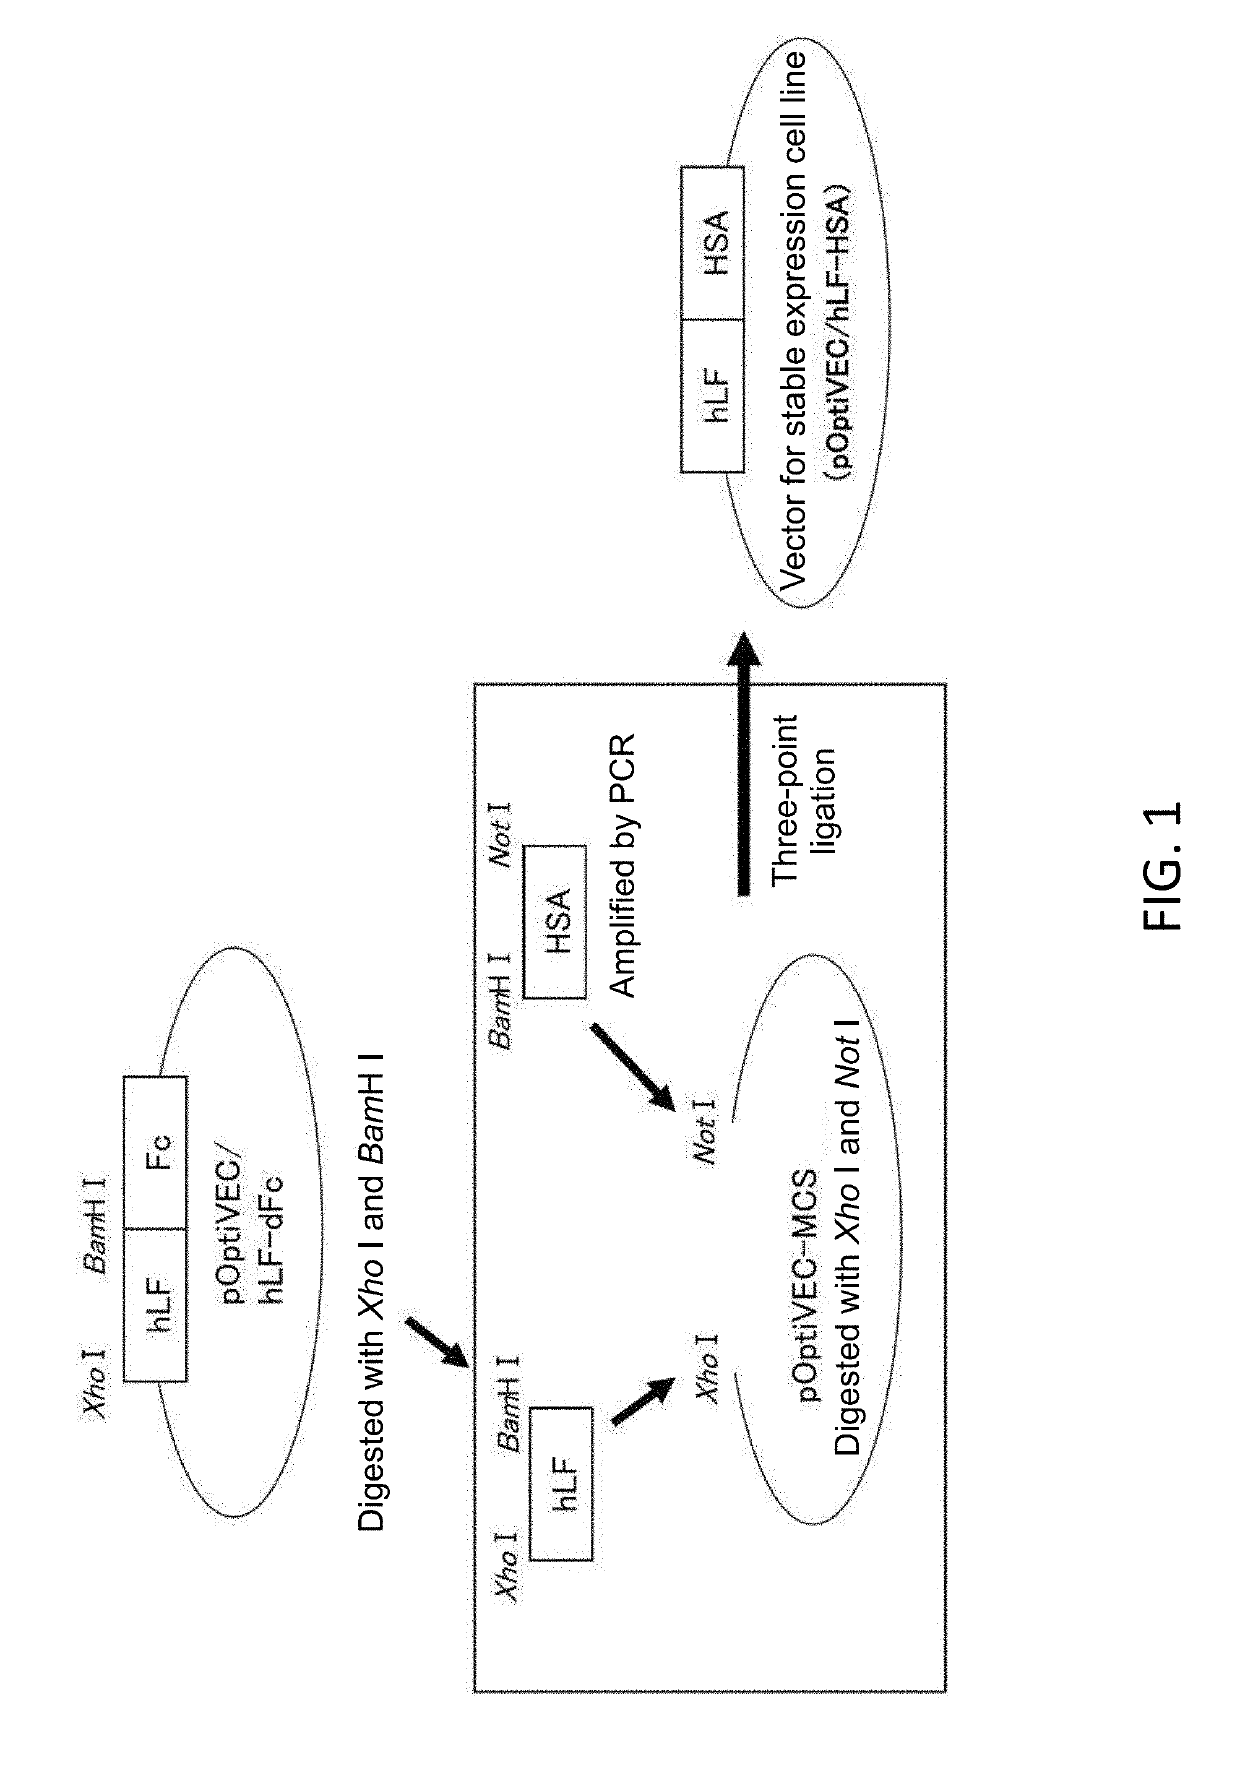 Lactoferrin/albumin fusion protein and production method therefor